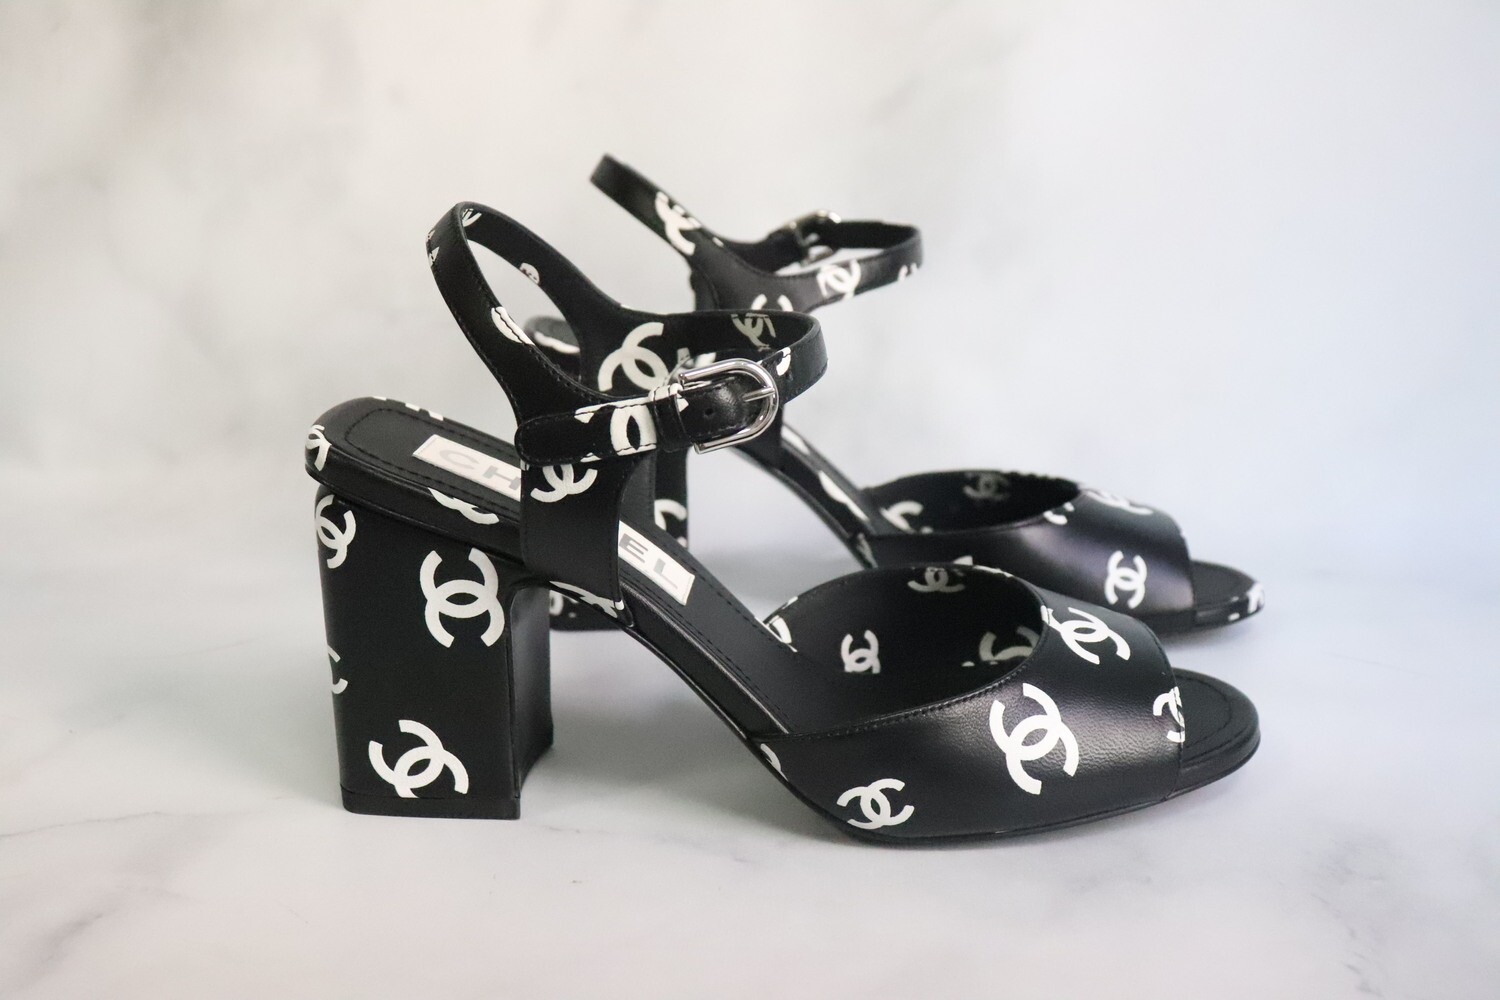 Chanel Shoes, Black with White CCs, Heels, Size 37, New in Box WA001